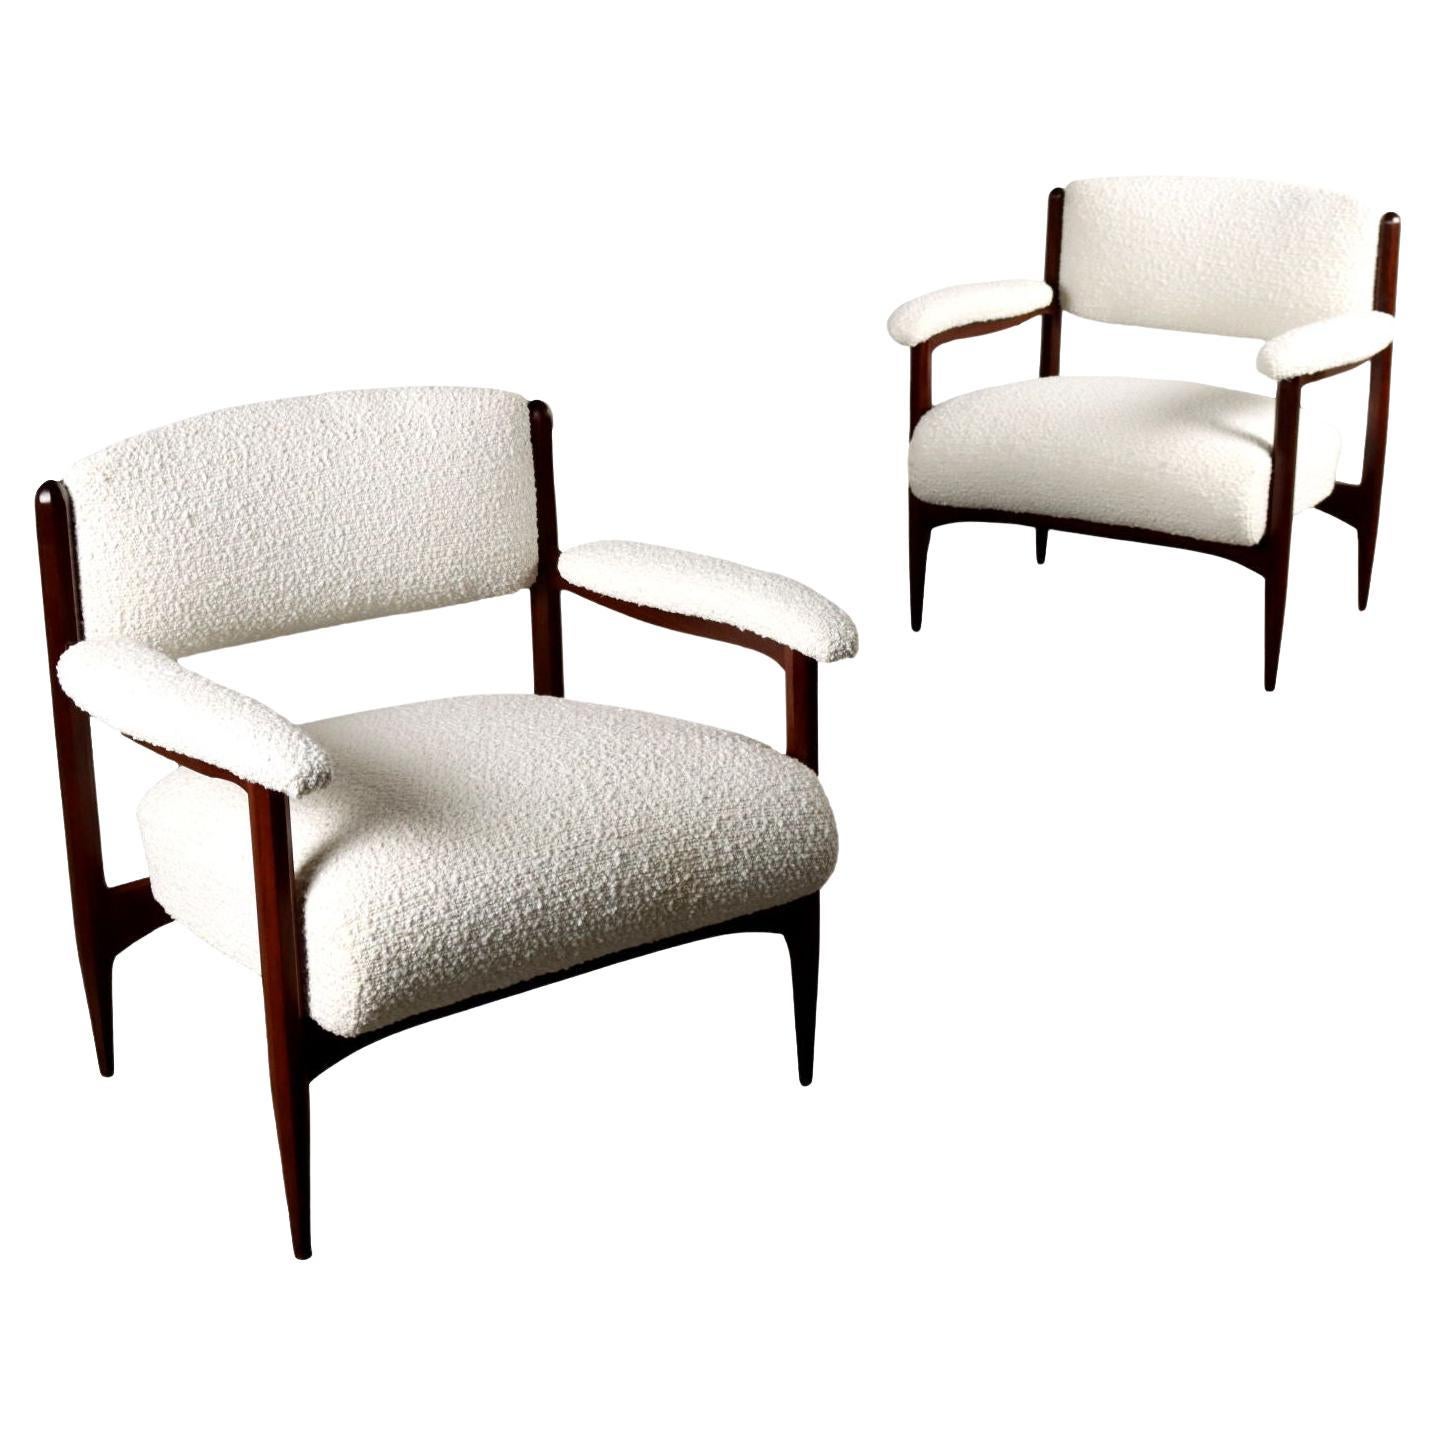 1960s armchairs with wooden arms, restored, white